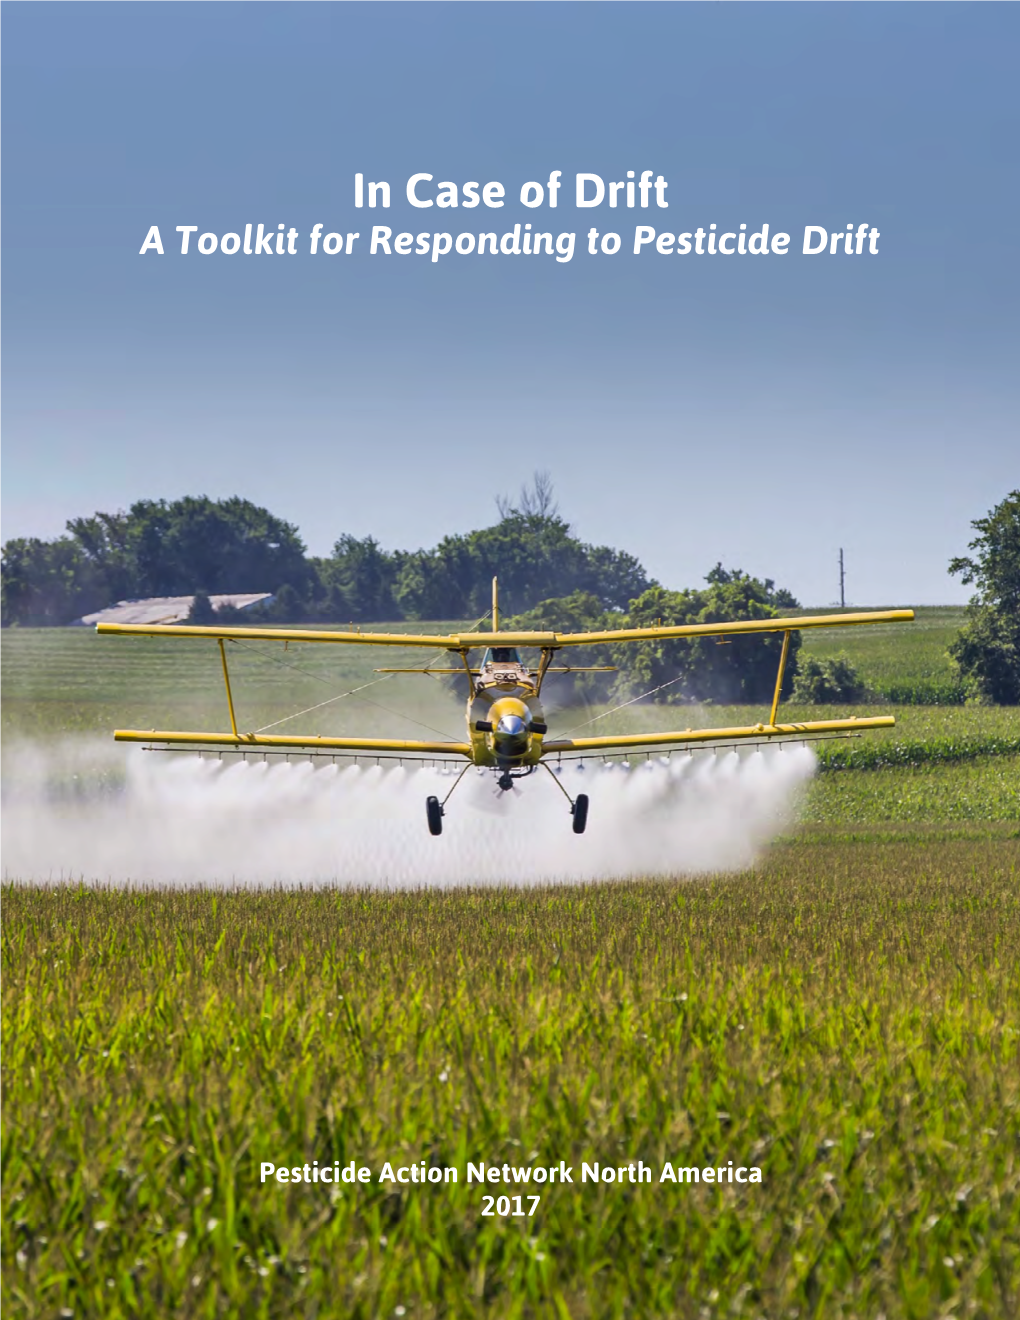 In Case of Drift: a Toolkit for Responding to Pesticide Drift